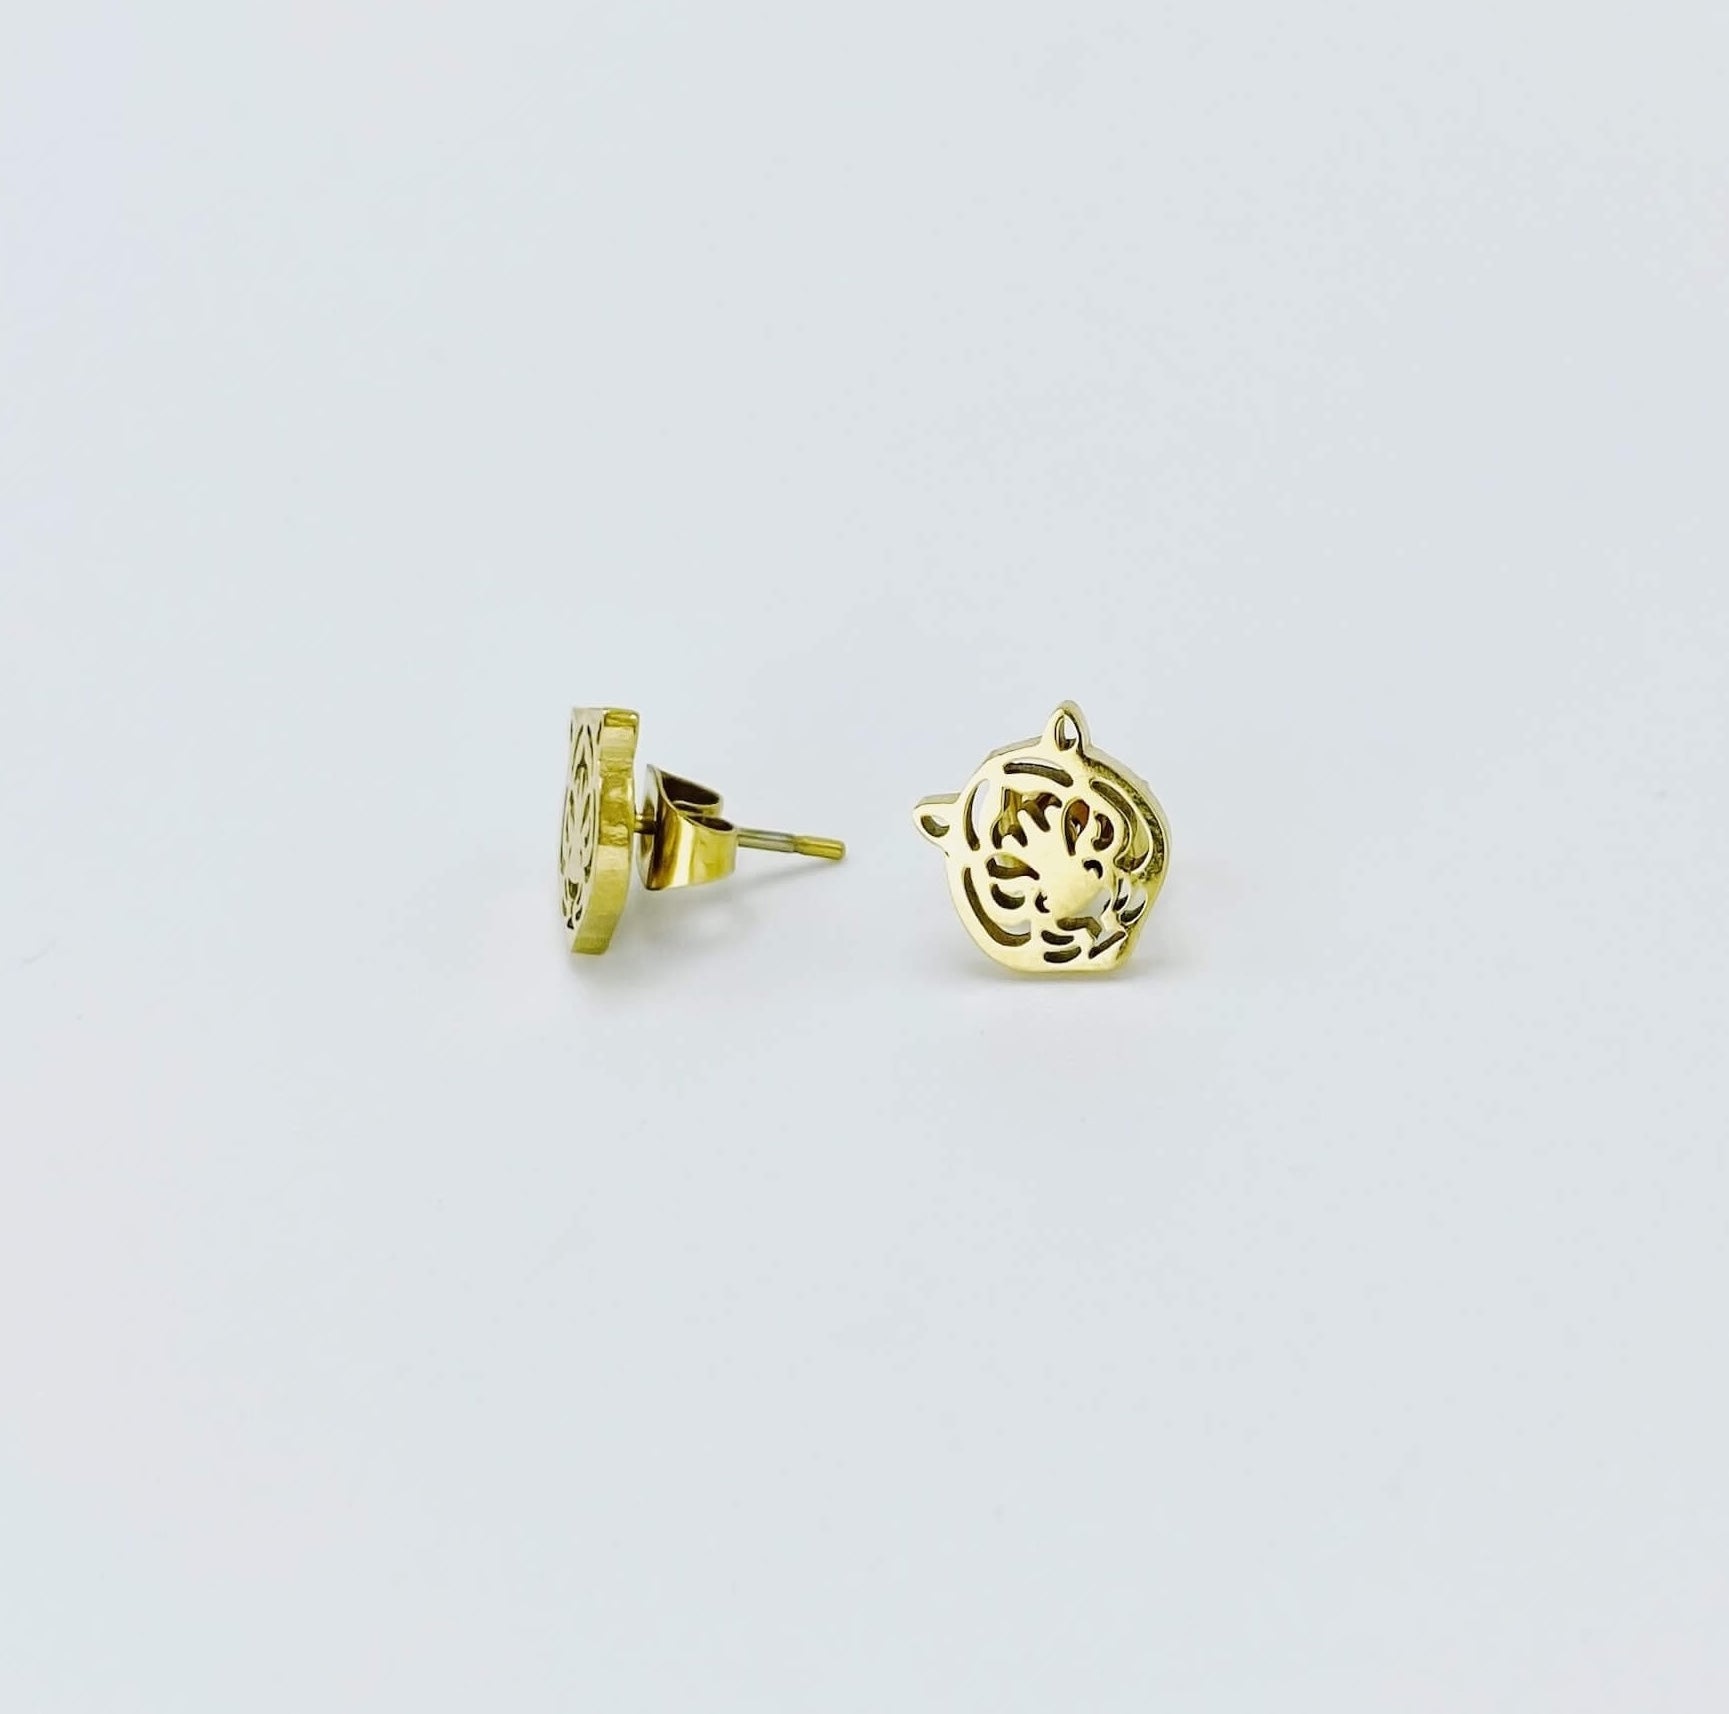 Metallic tiger stud earrings in a yellow gold hue made from stainless steel. 